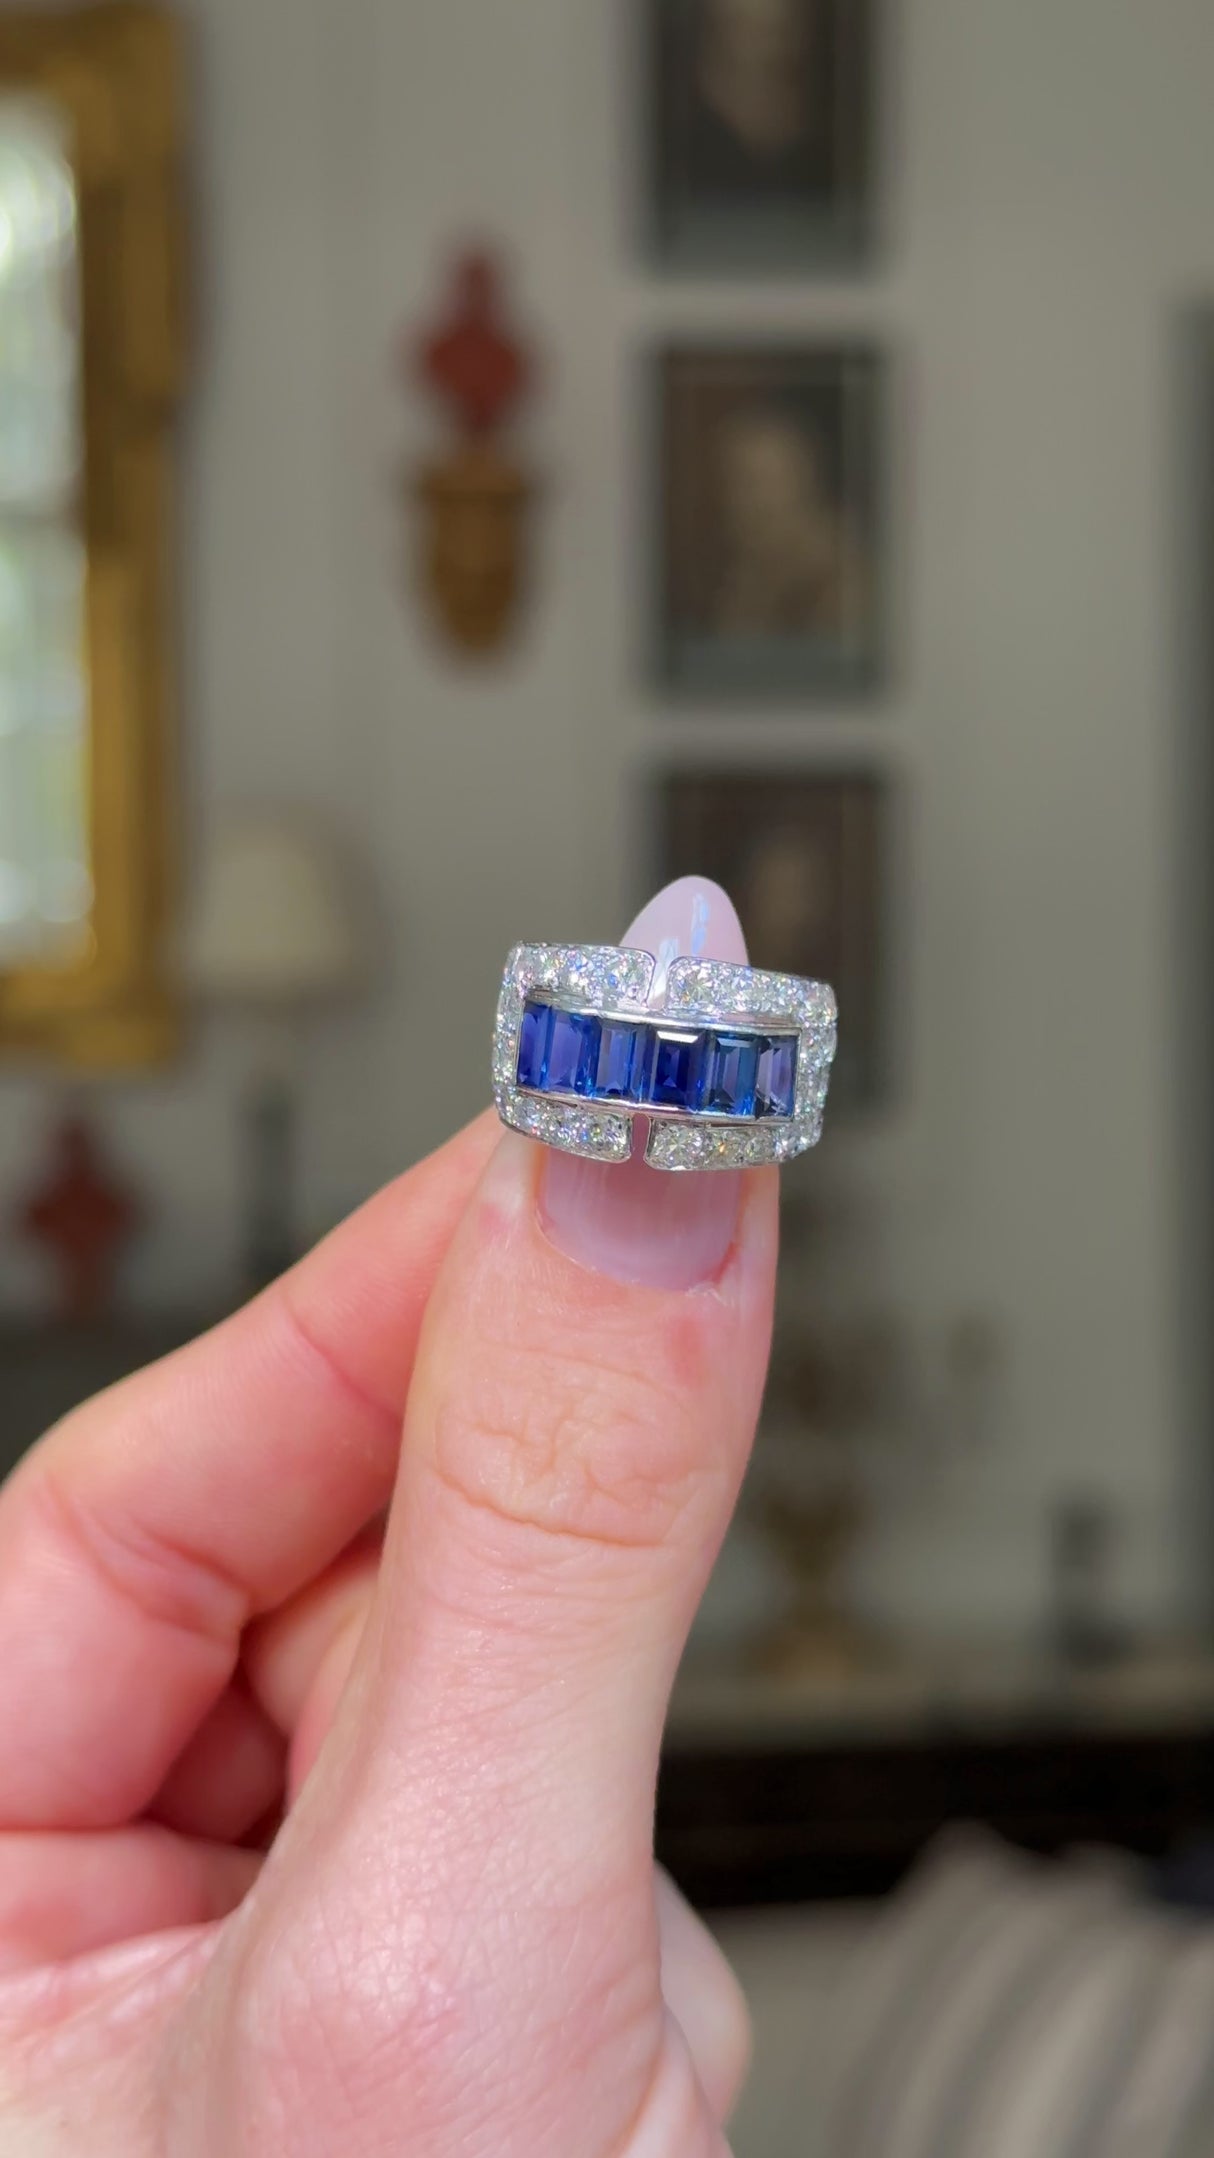 Sapphire and diamond Art Deco Band, held in fingers and rotated to give perspective